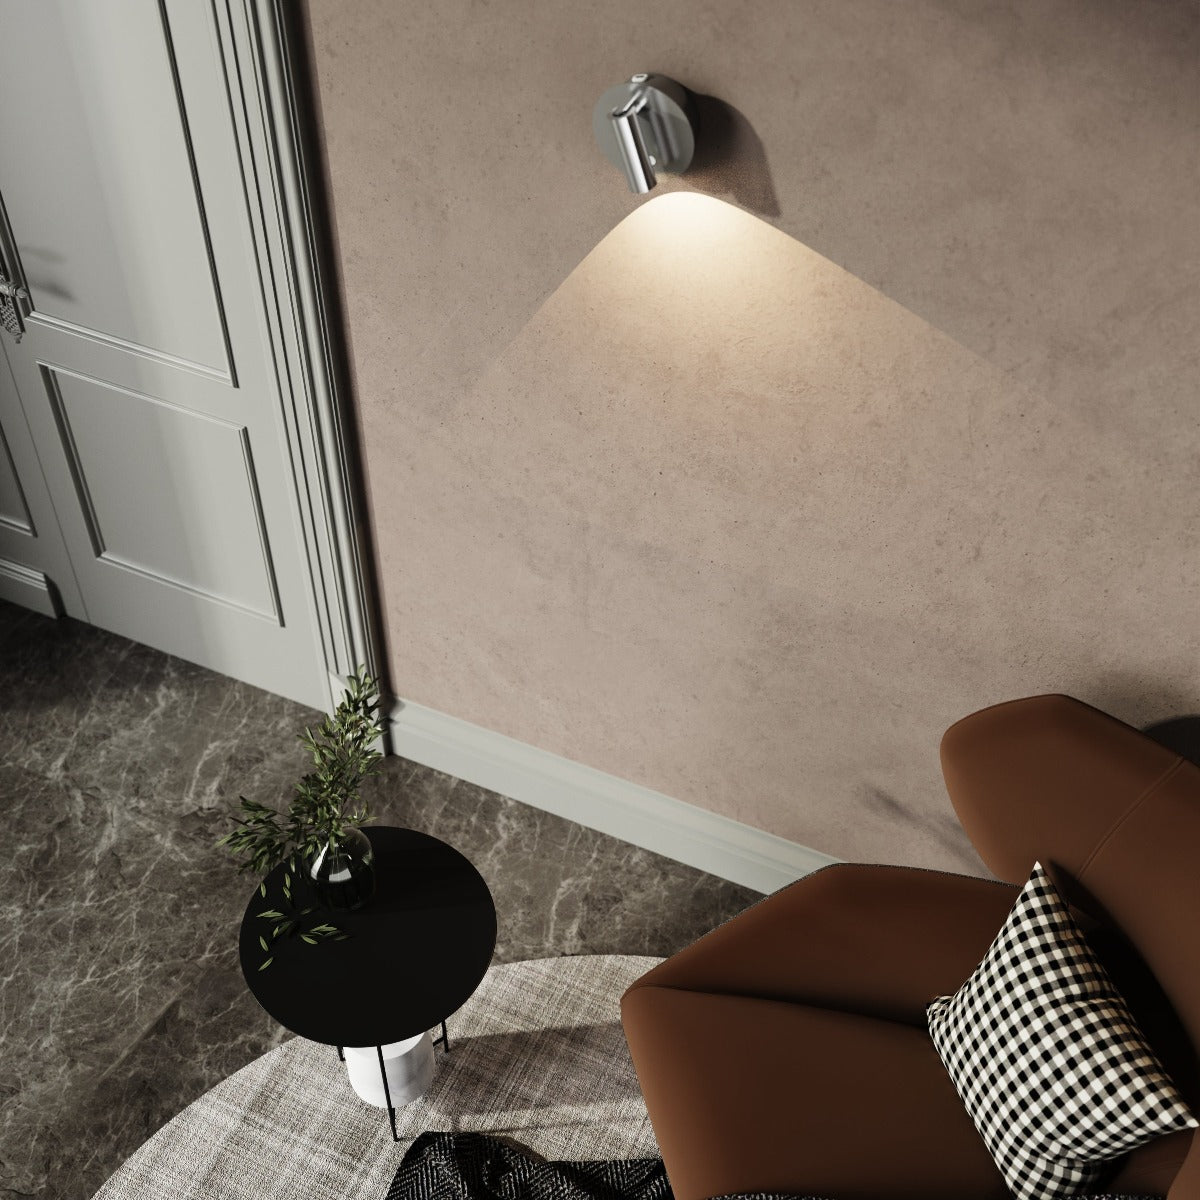  Matilda's elegant and stylish finish makes it the ideal addition to any room. It will look perfect in both traditional and modern environments. The beauty of this wall light means you can install it on any wall without the requirement of expensive electrician fees and mains installation.